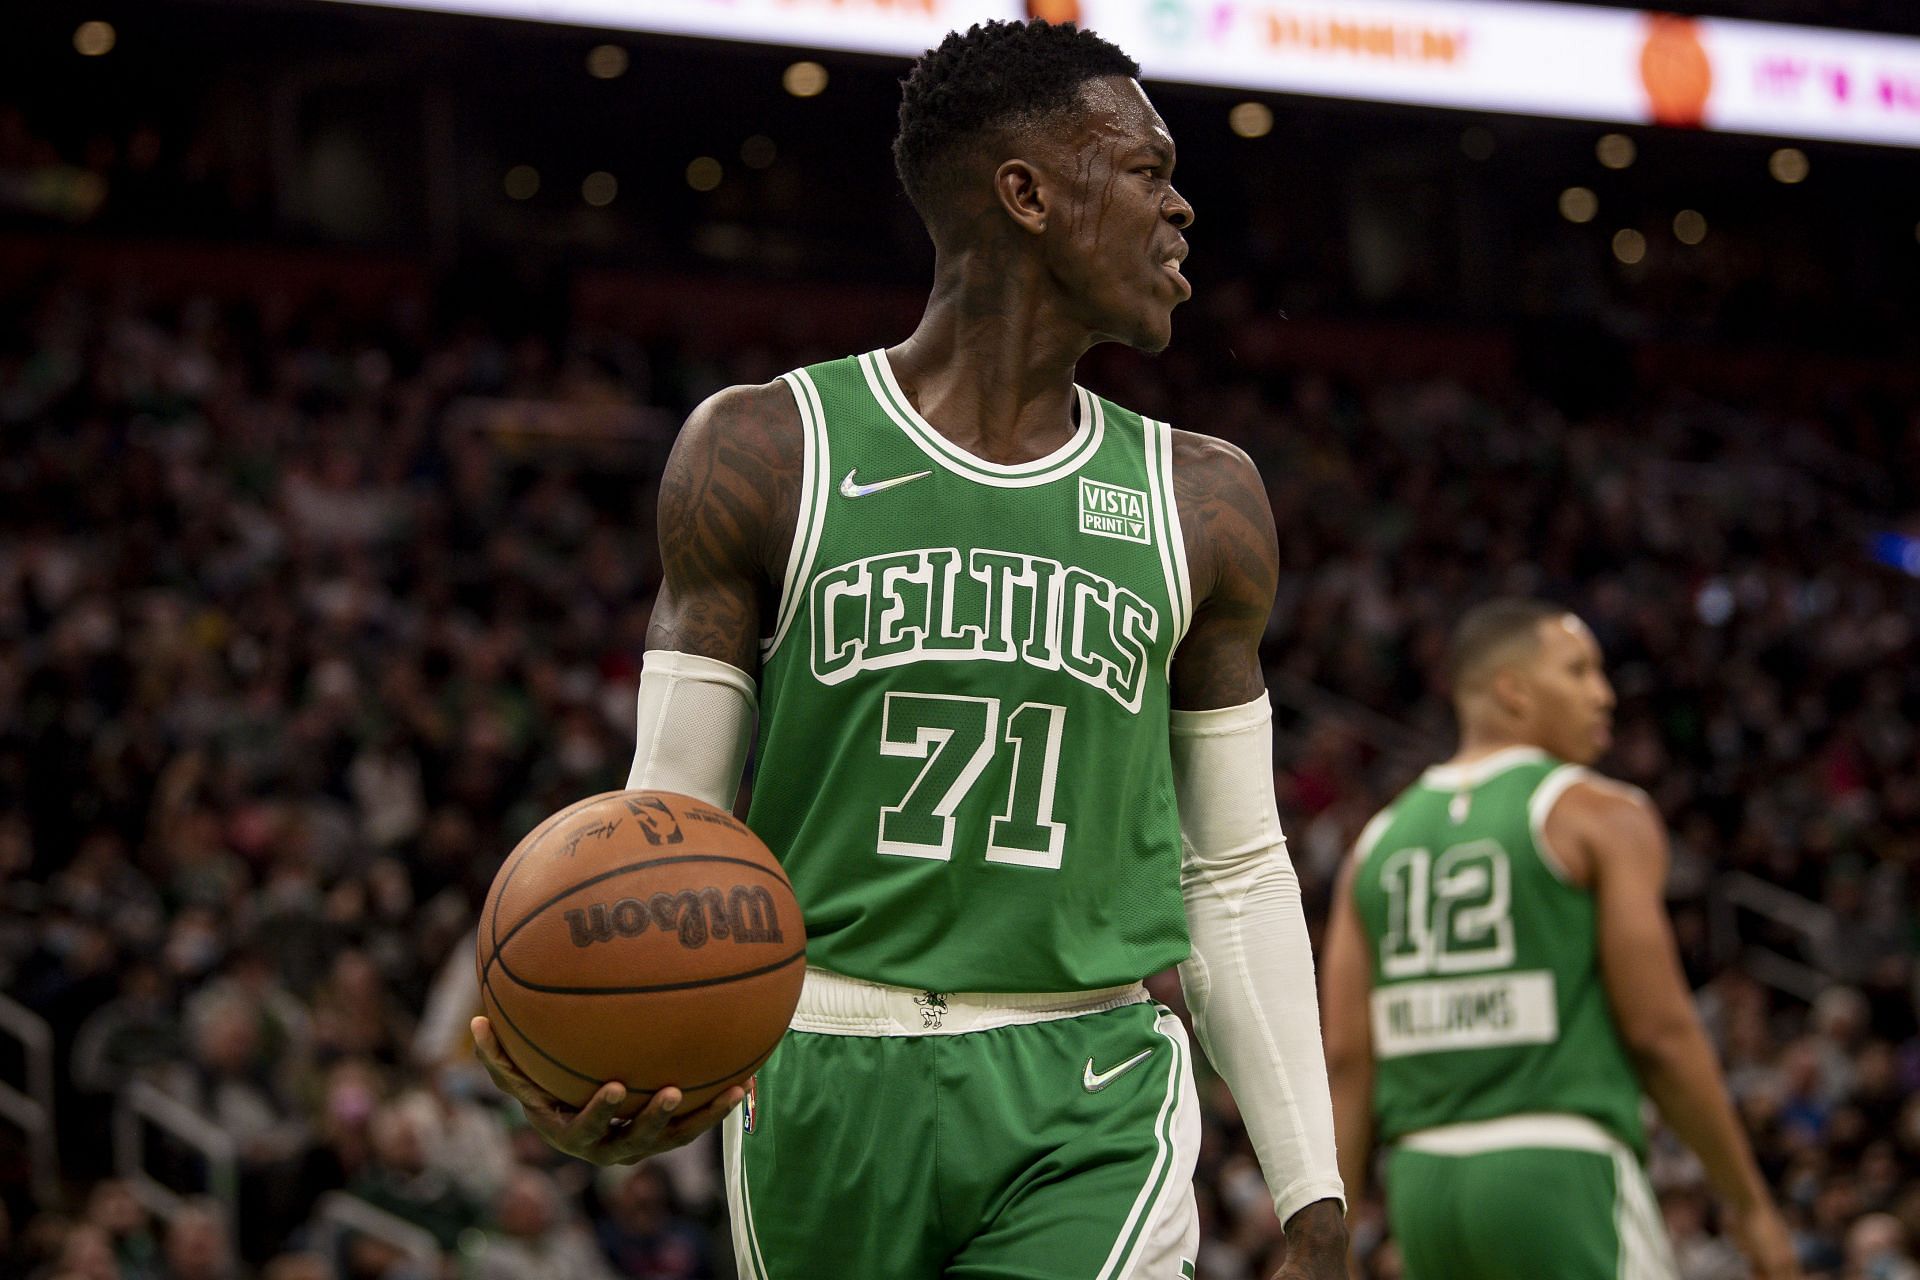 Boston Celtics guard Dennis Schroder is heating up as a potential Sixth Man of the Year